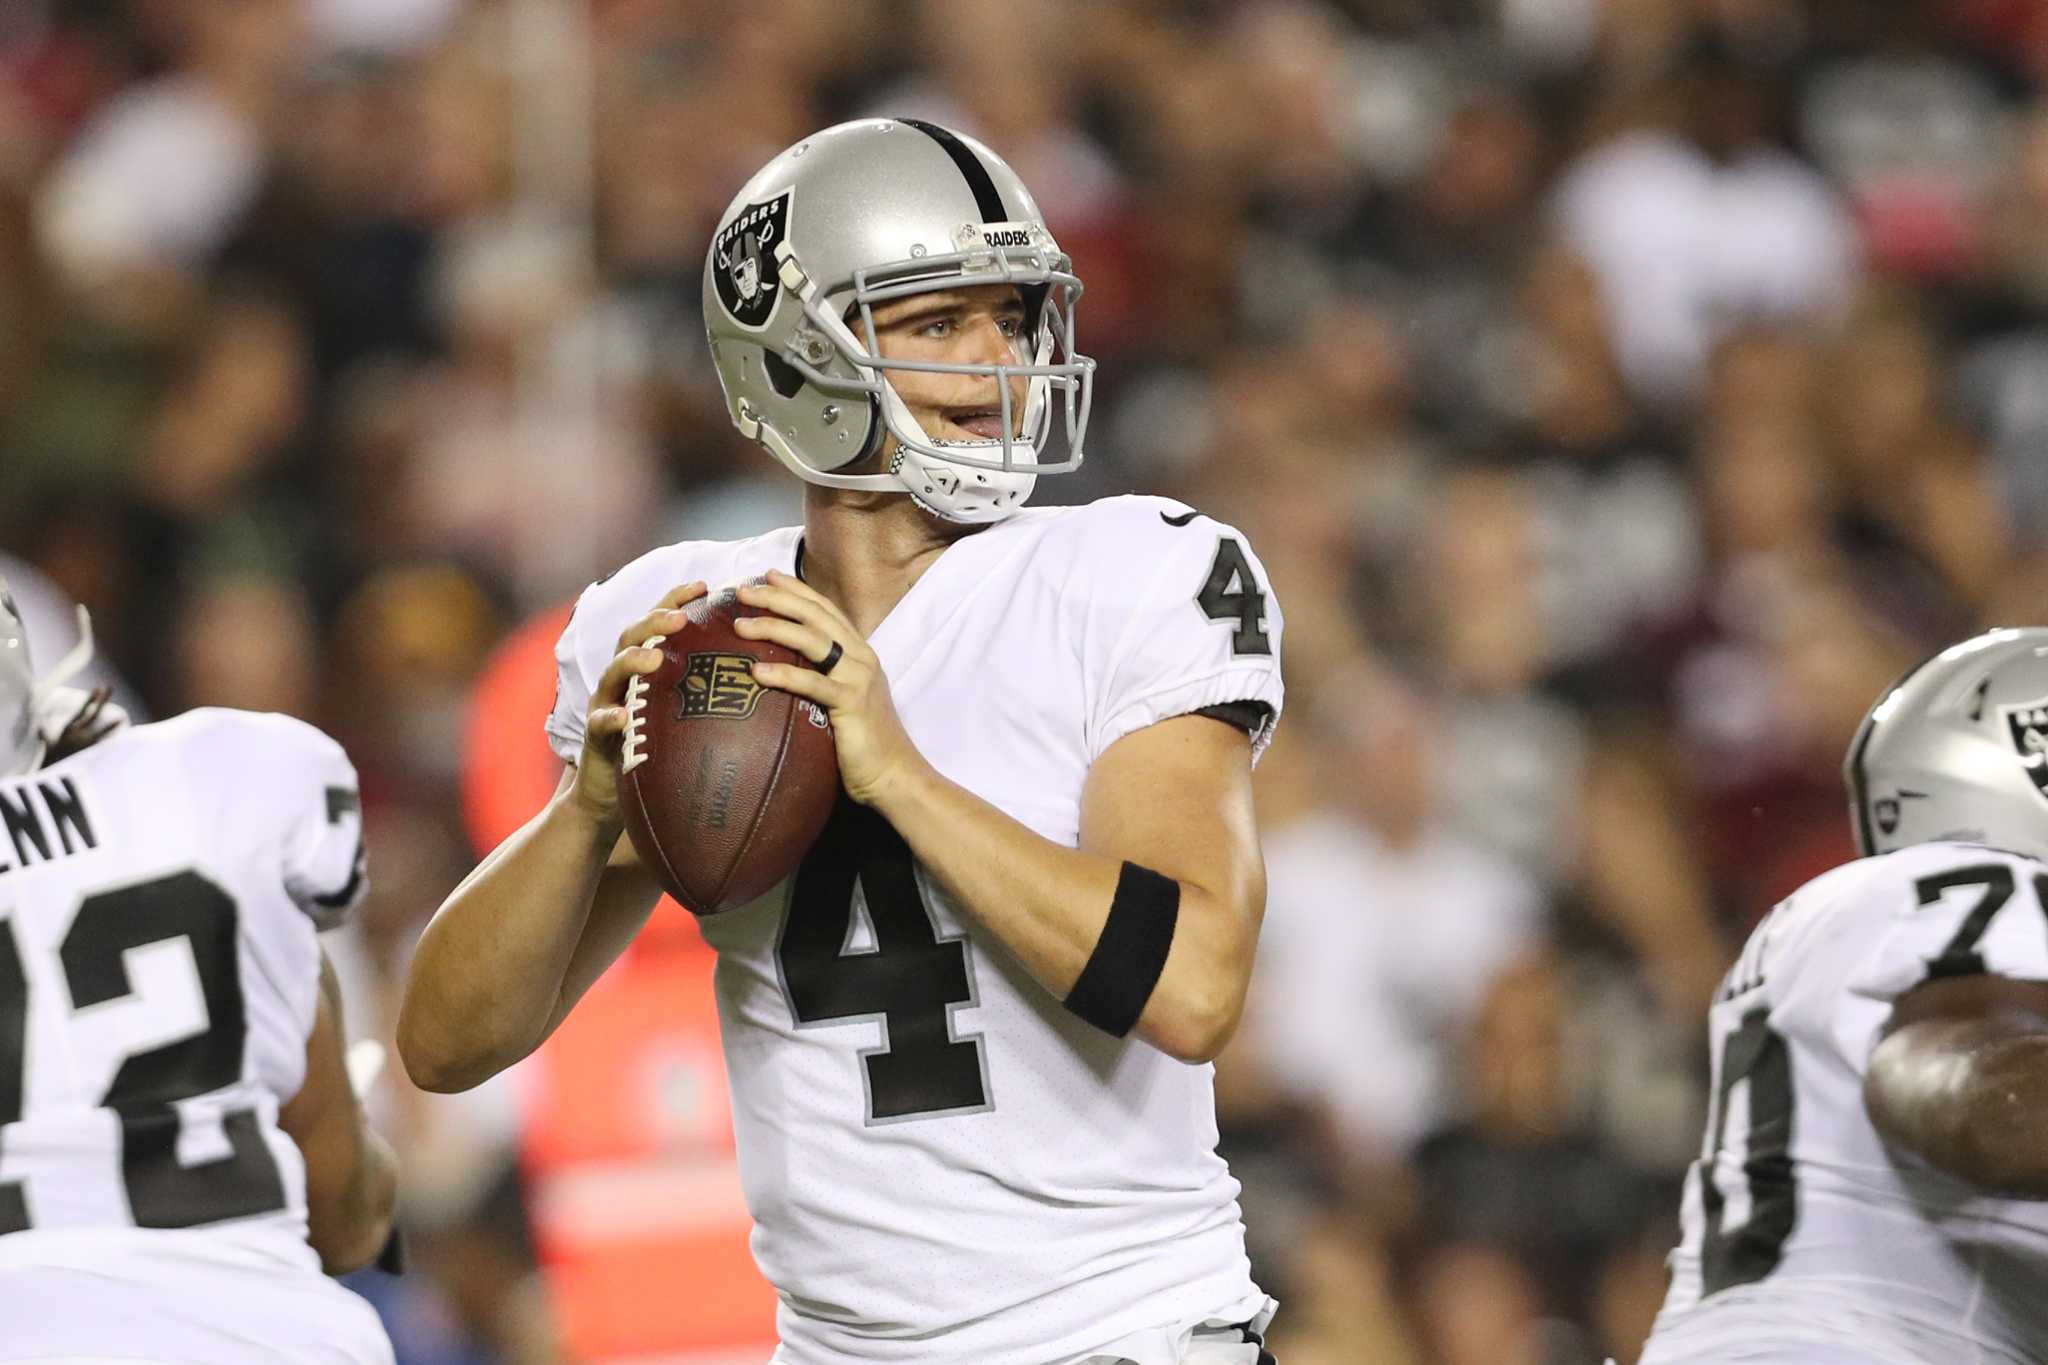 Derek Carr returns to practice for Raiders after back injury.